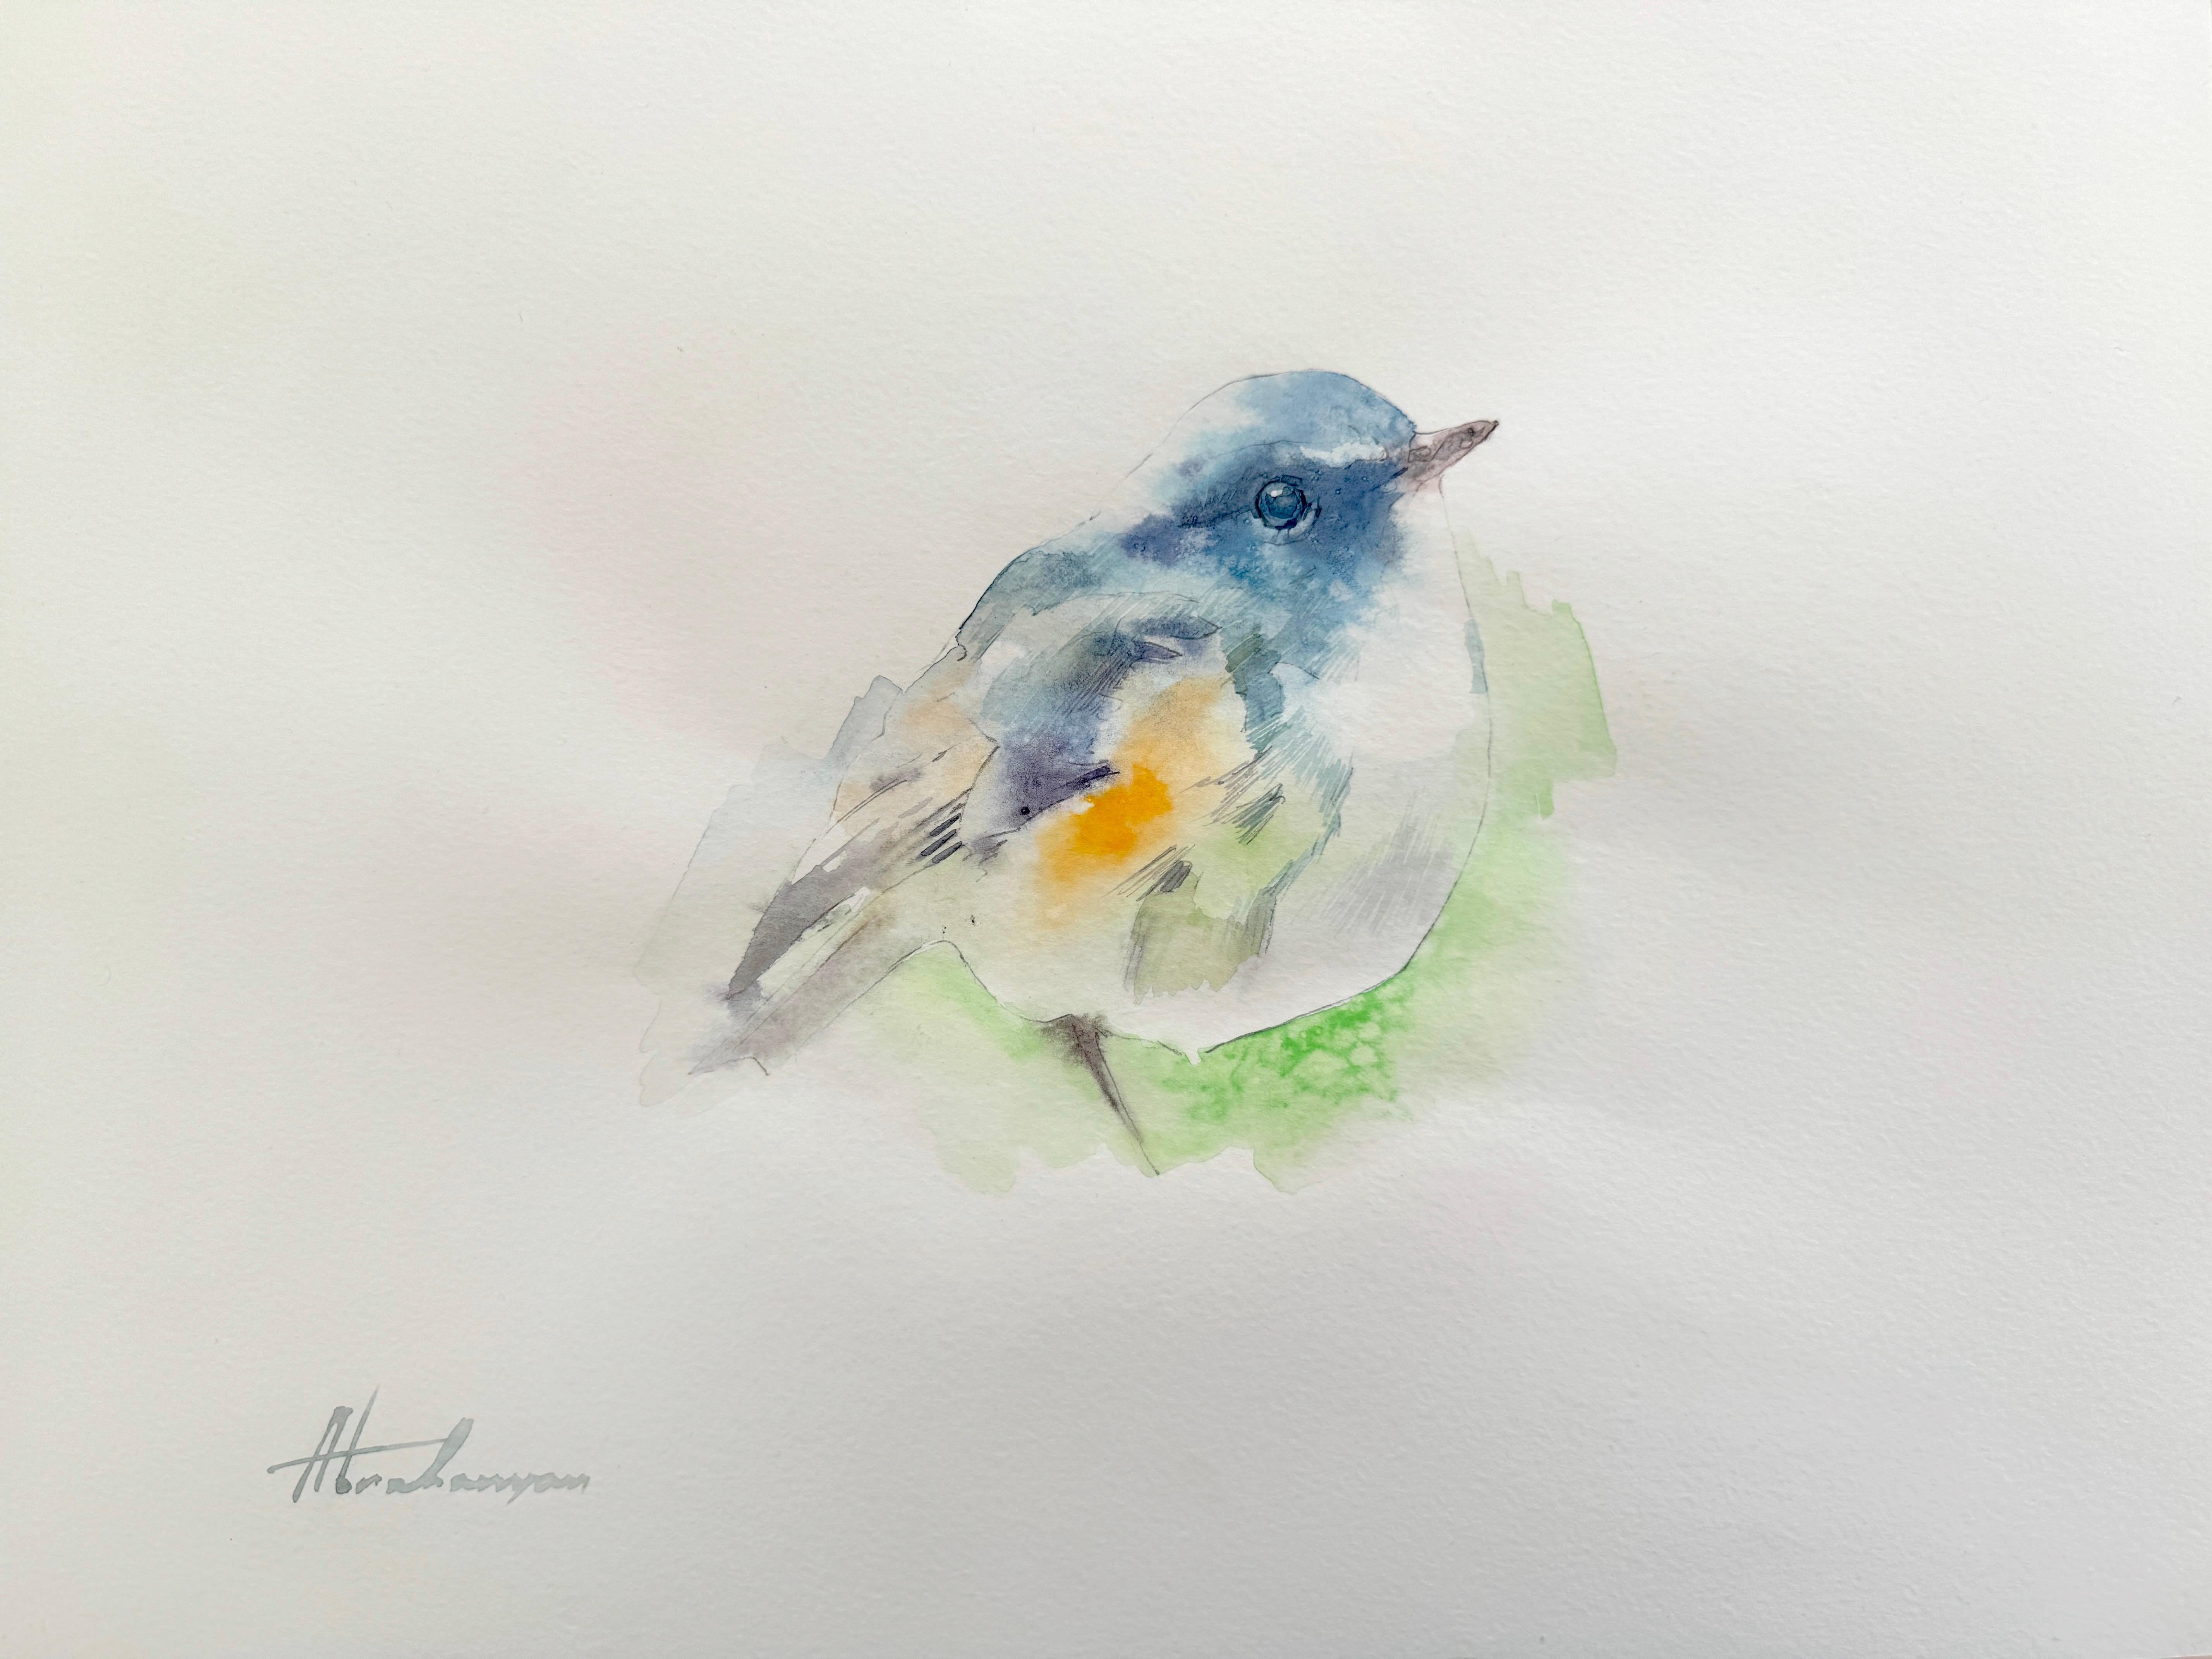 Artyom Abrahamyan Animal Art - Blue-tail, Bird, Watercolor on Paper, Handmade Painting, One of a Kind